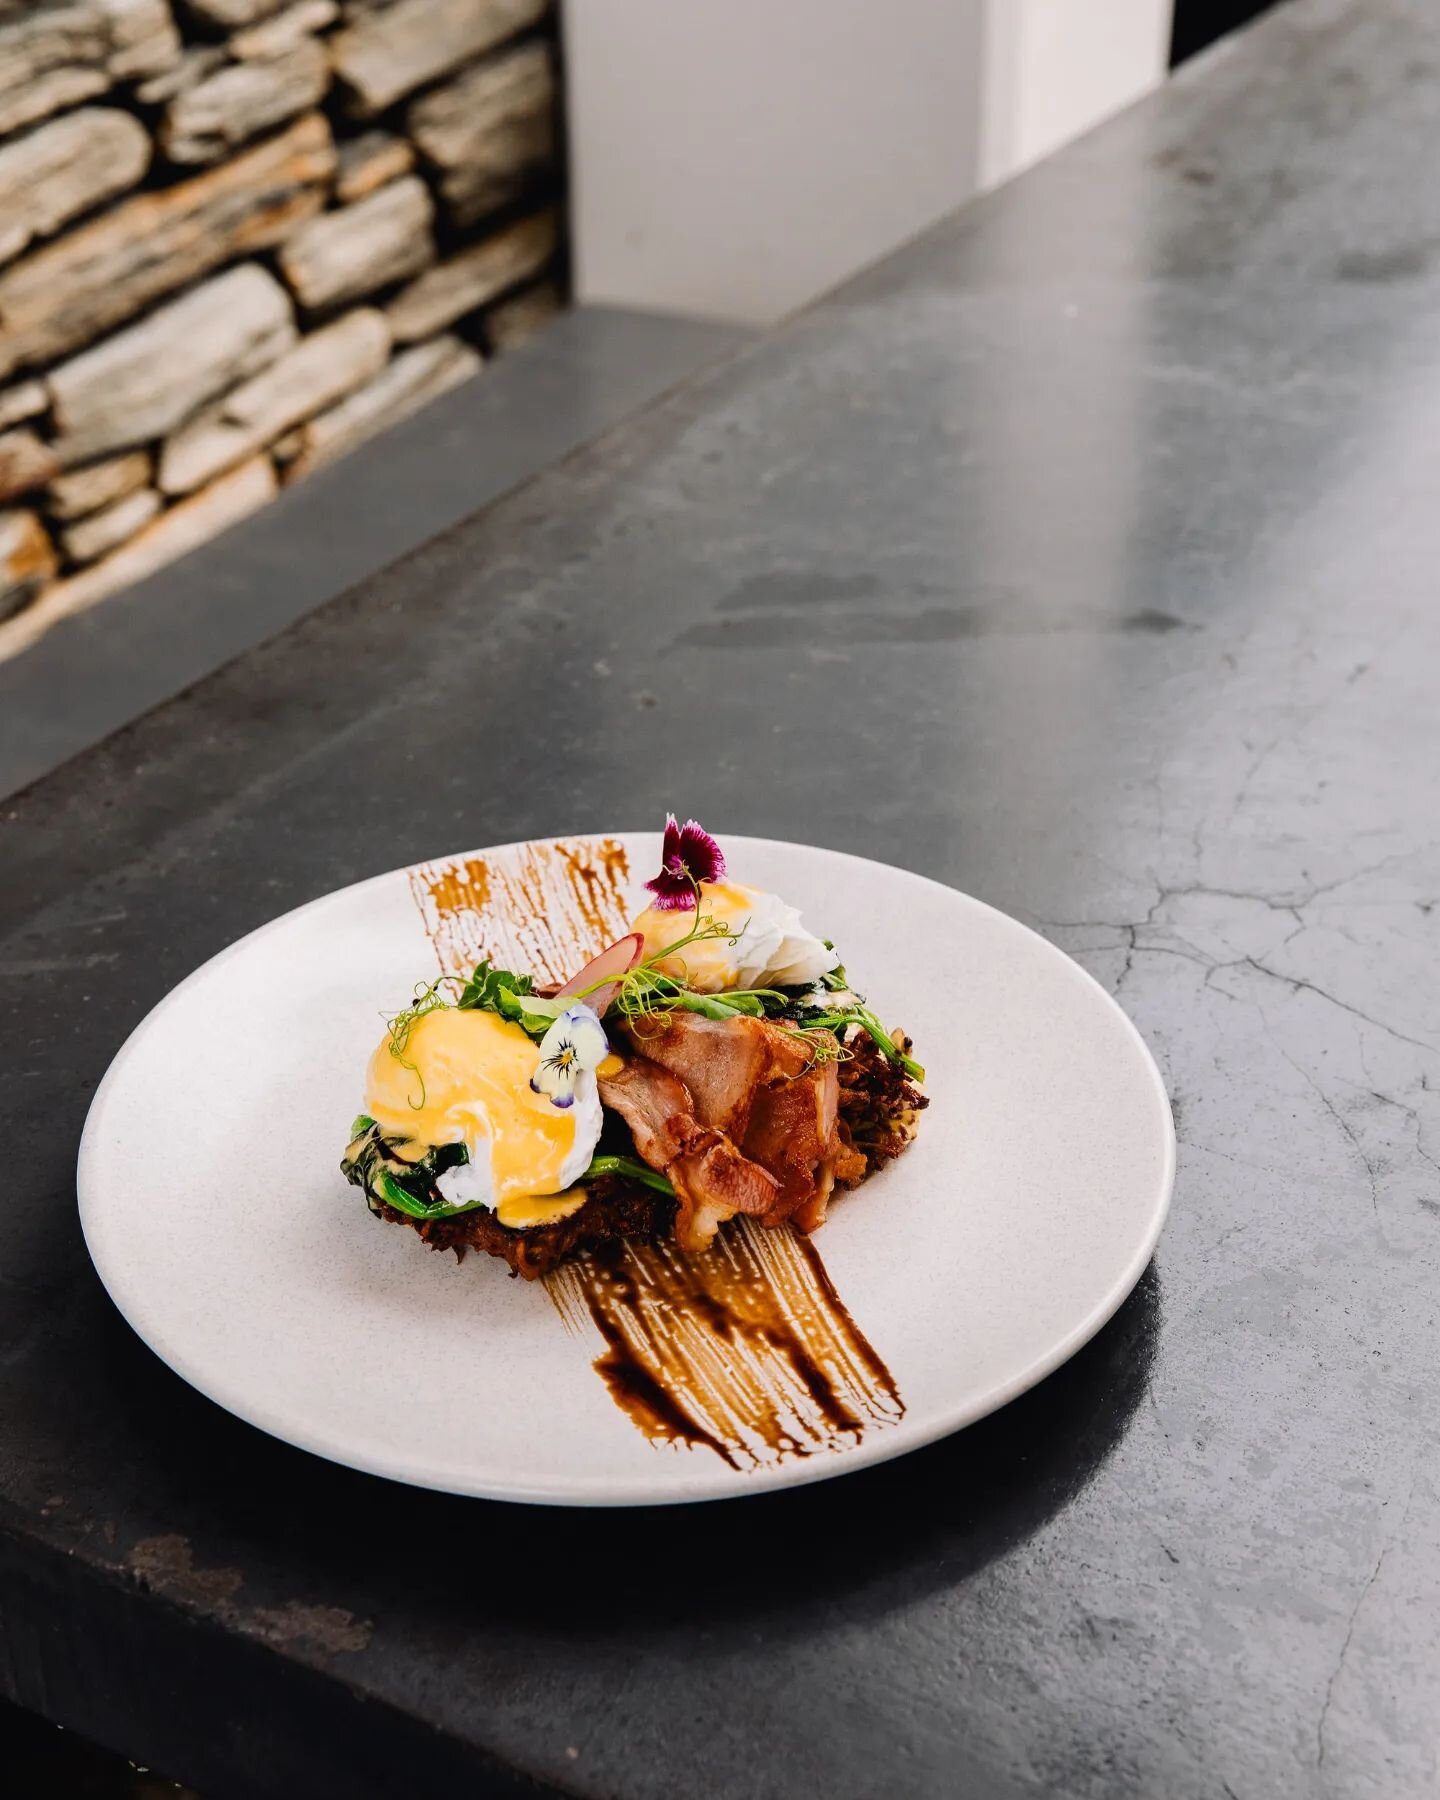 Eggs Bene anyone? 🙋

Surely it doesn't have to be the weekend to treat yourself to brunch? Go on. Do it 🥳